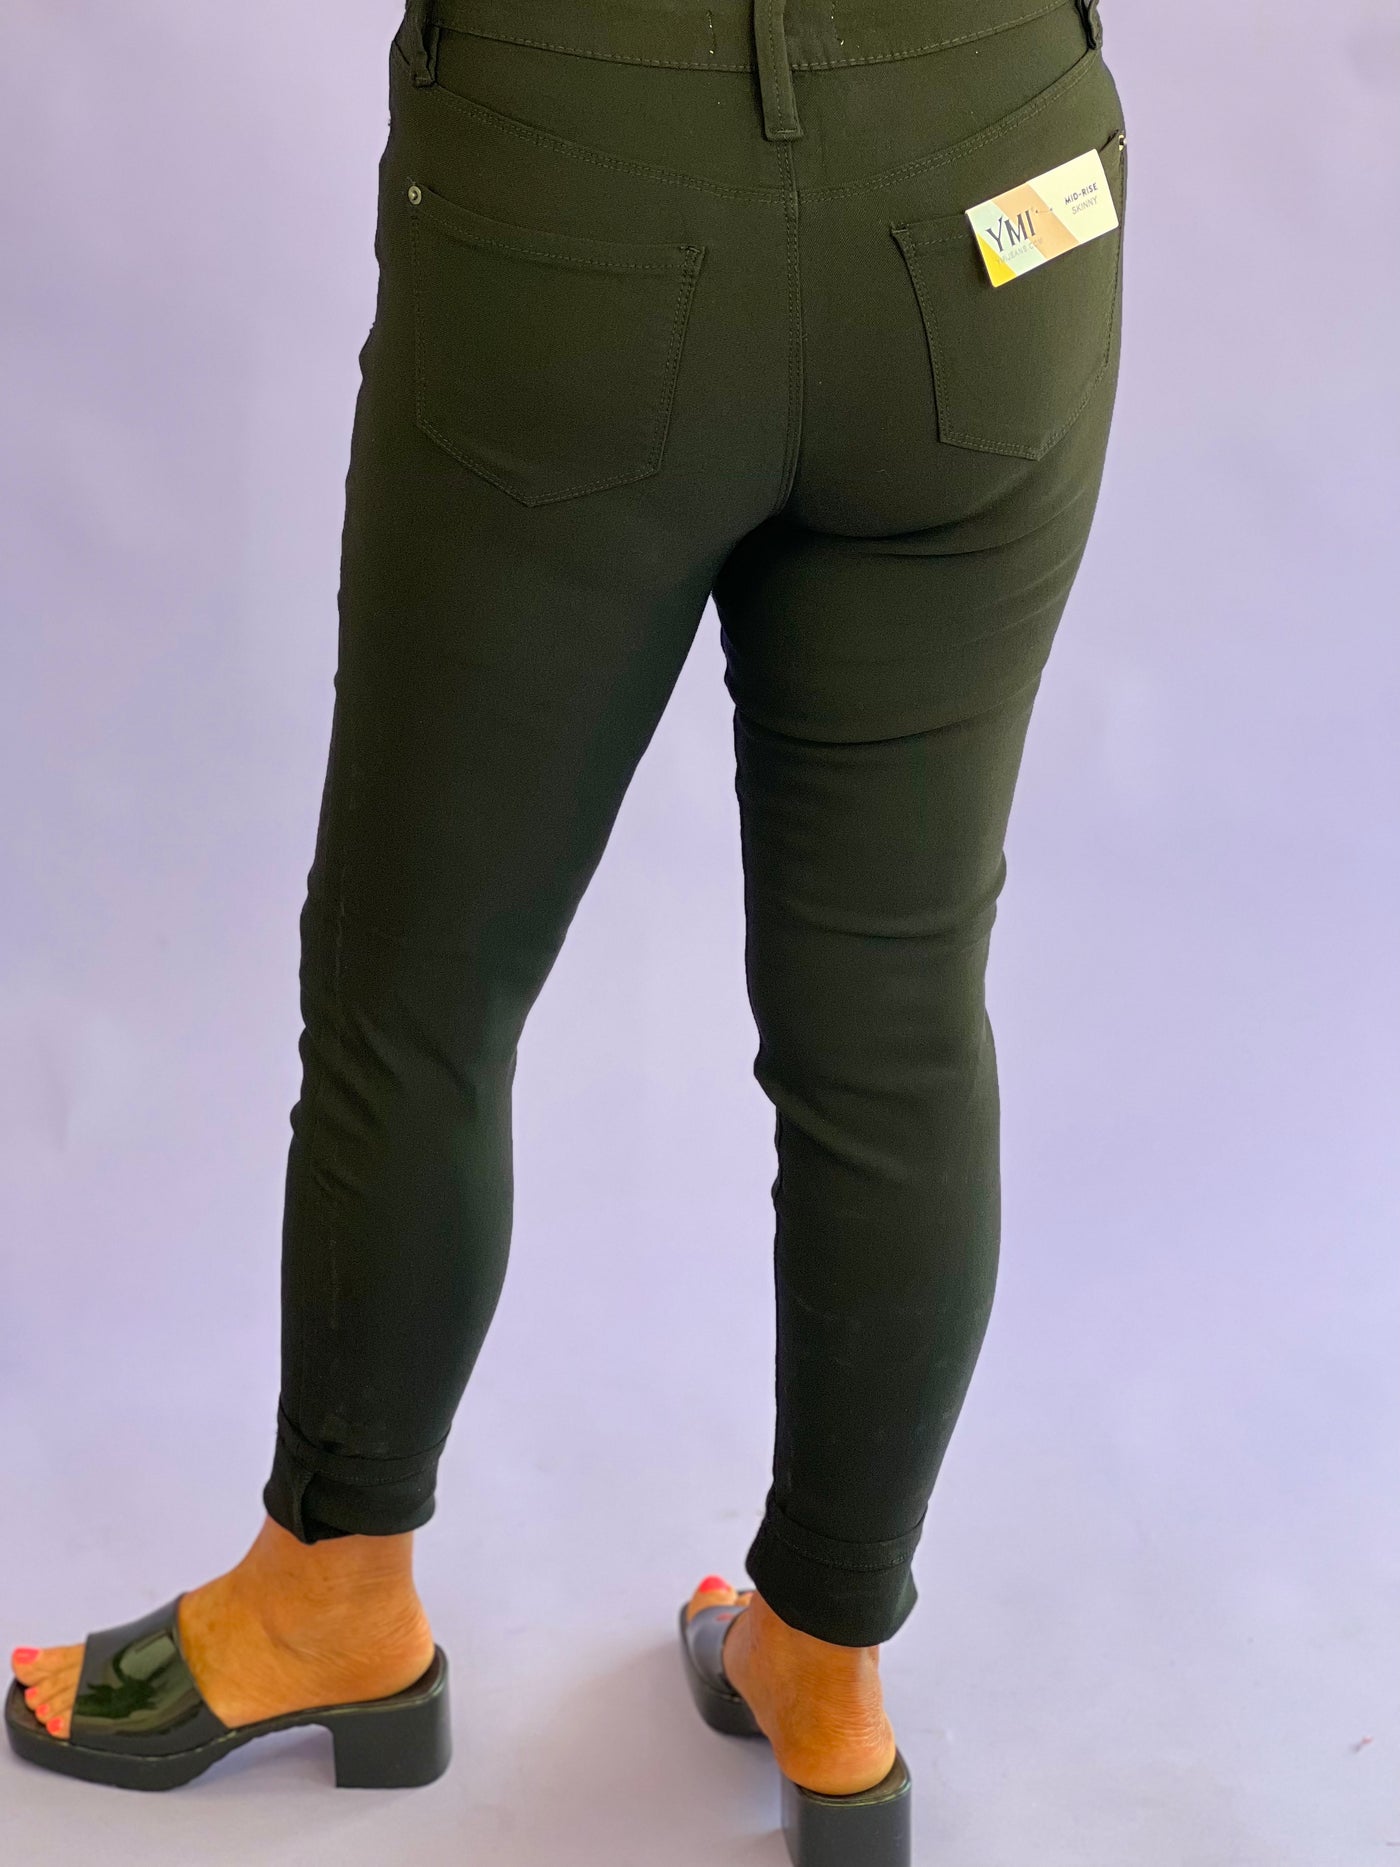 Pre-Order: Hyperstretch Mid-Rise Skinny Jean - Small through 3X - 6 Colors- FINAL SALE